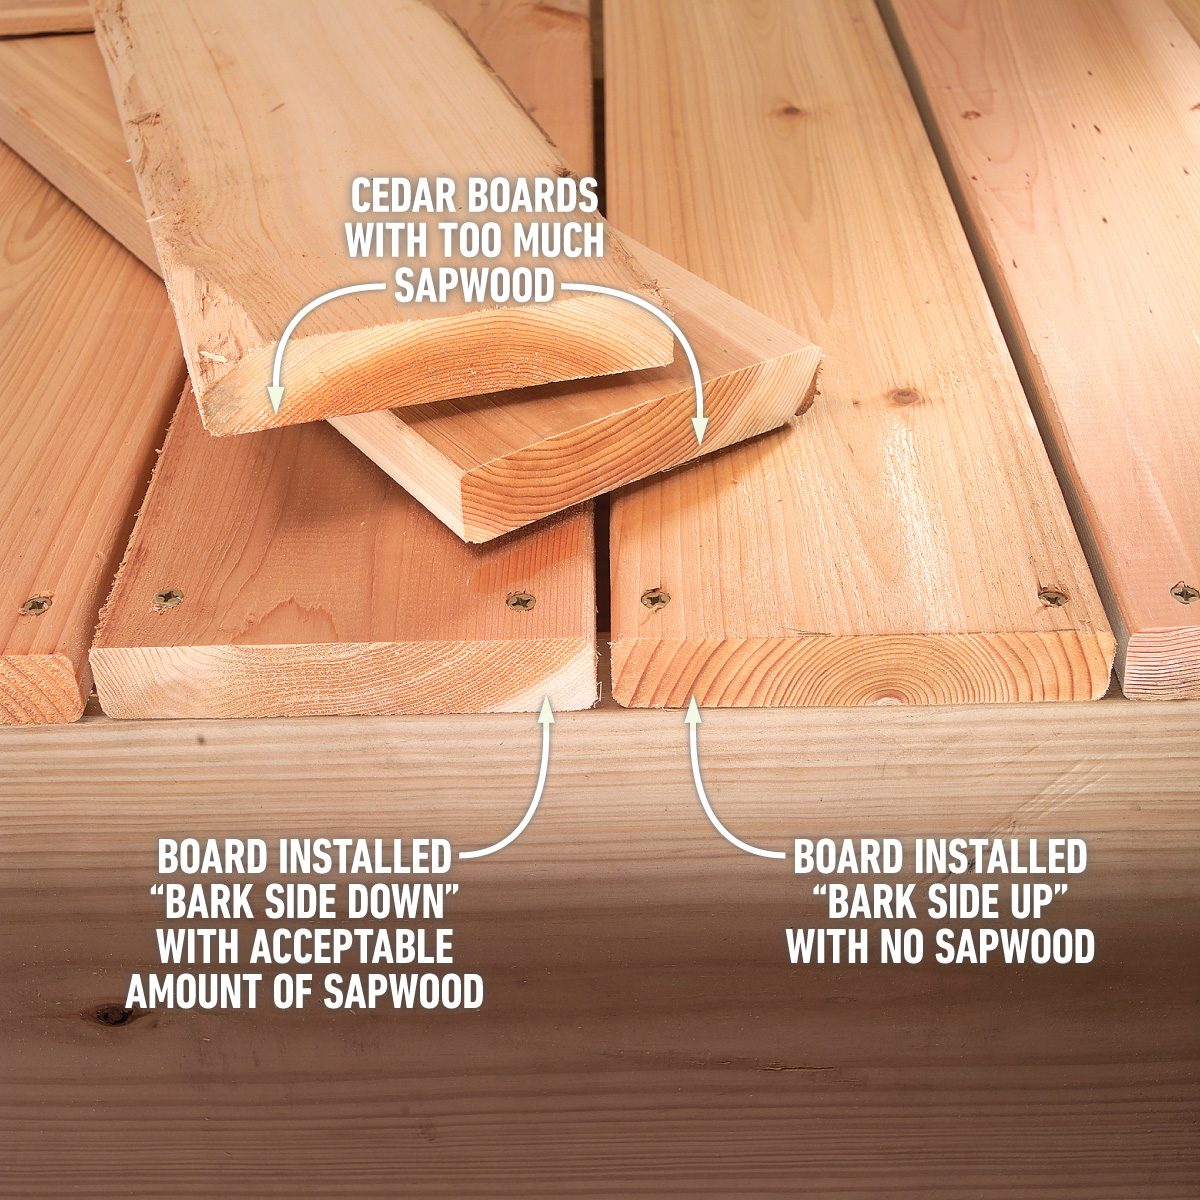 Tips For Choosing And Buying Deck Lumber Select Cedar or Redwood Decking Boards Cut From Heartwood